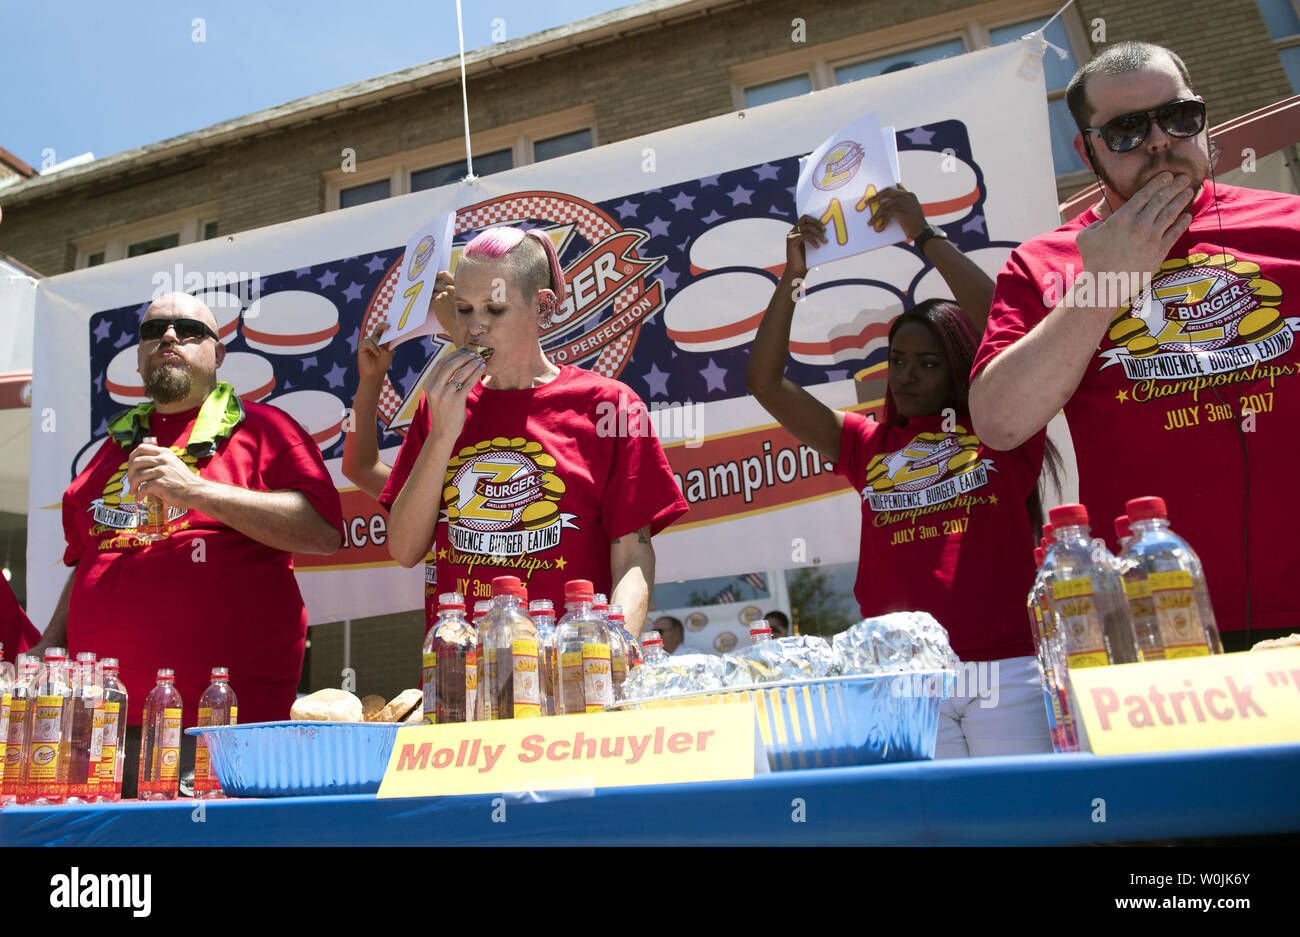 Molly Schuyler (C), Patrick 'Deep Dish' Bettletti (R) and Bob 'Notorious B.O.B. Schoudt  compete in the Z-Burger 8th Annual Independence Burger Eating Championship, in Washington D.C. on July 3, 2017. Schuyler won this year's contest eating 21 burgers in 10 minutes. Photo by Kevin Dietsch/UPI Stock Photo